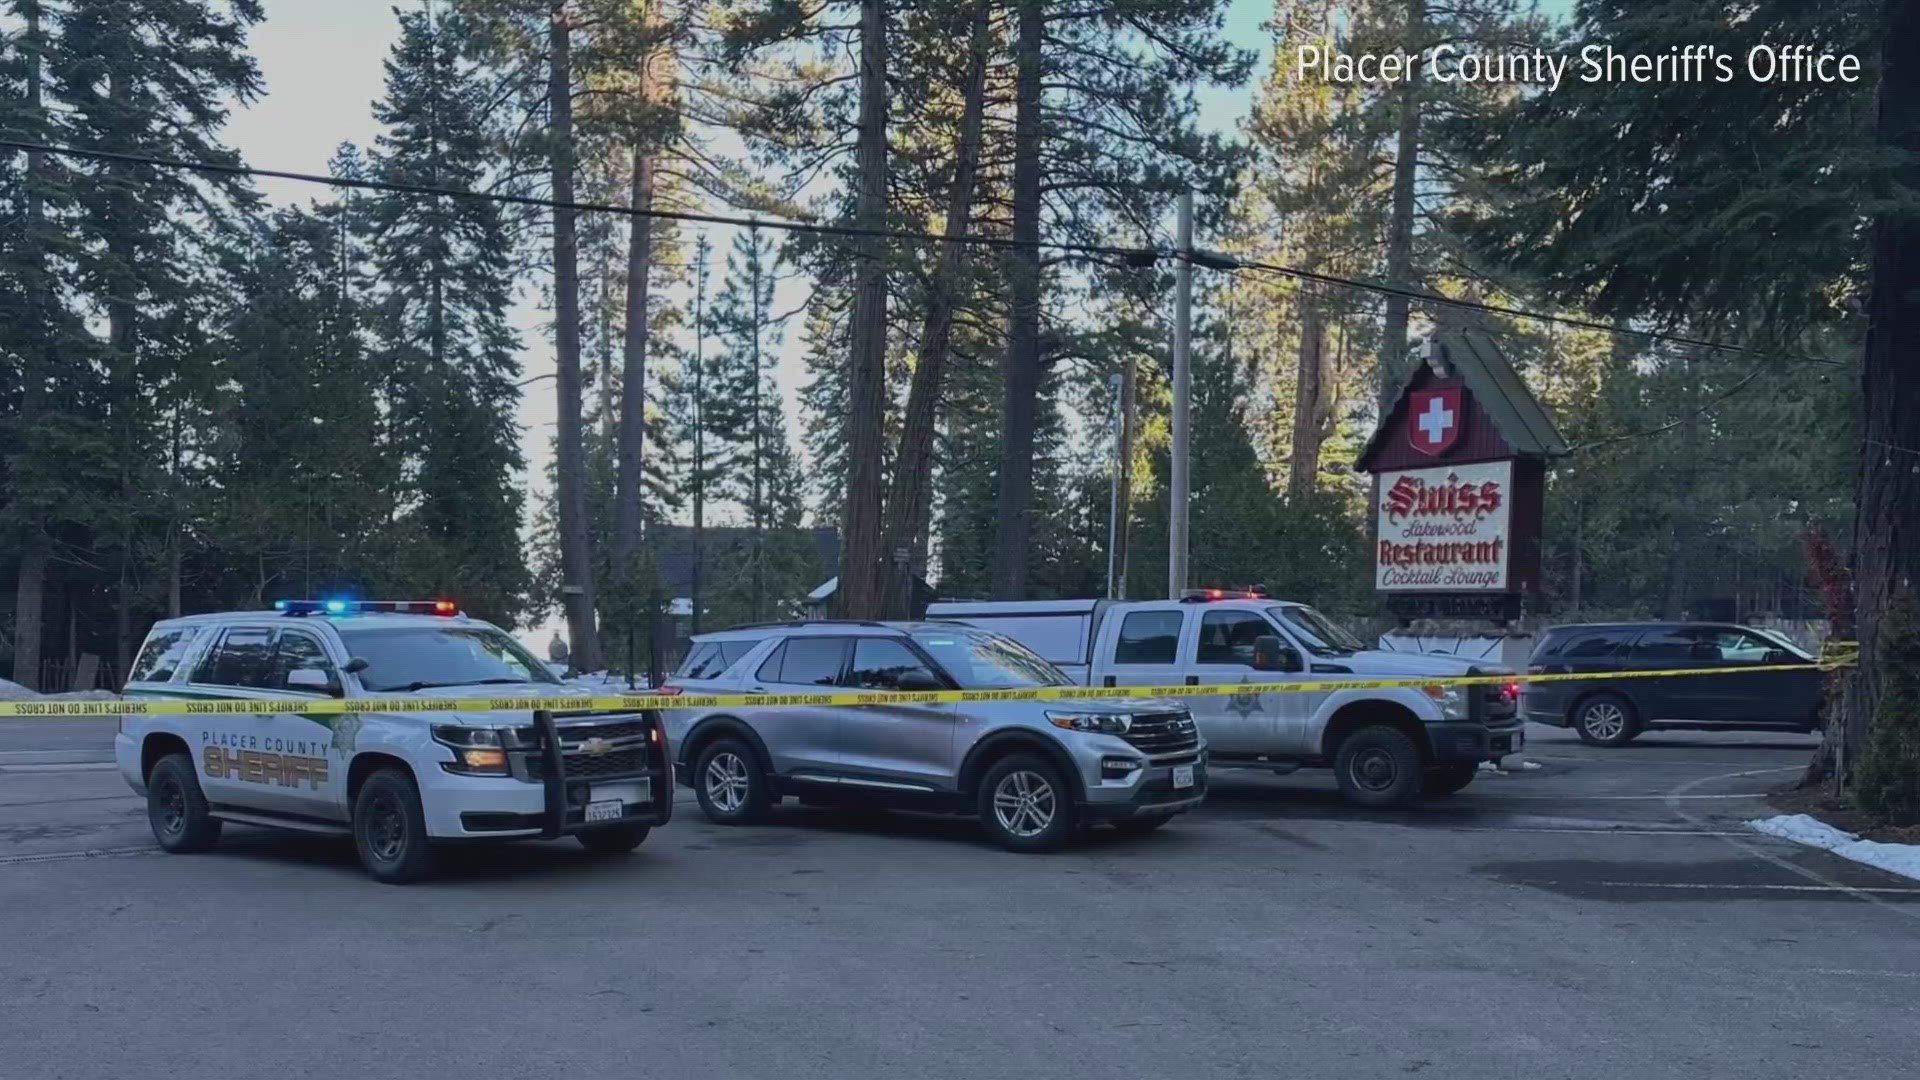 One person is in the hospital after a reported shooting near Homewood in Placer County.